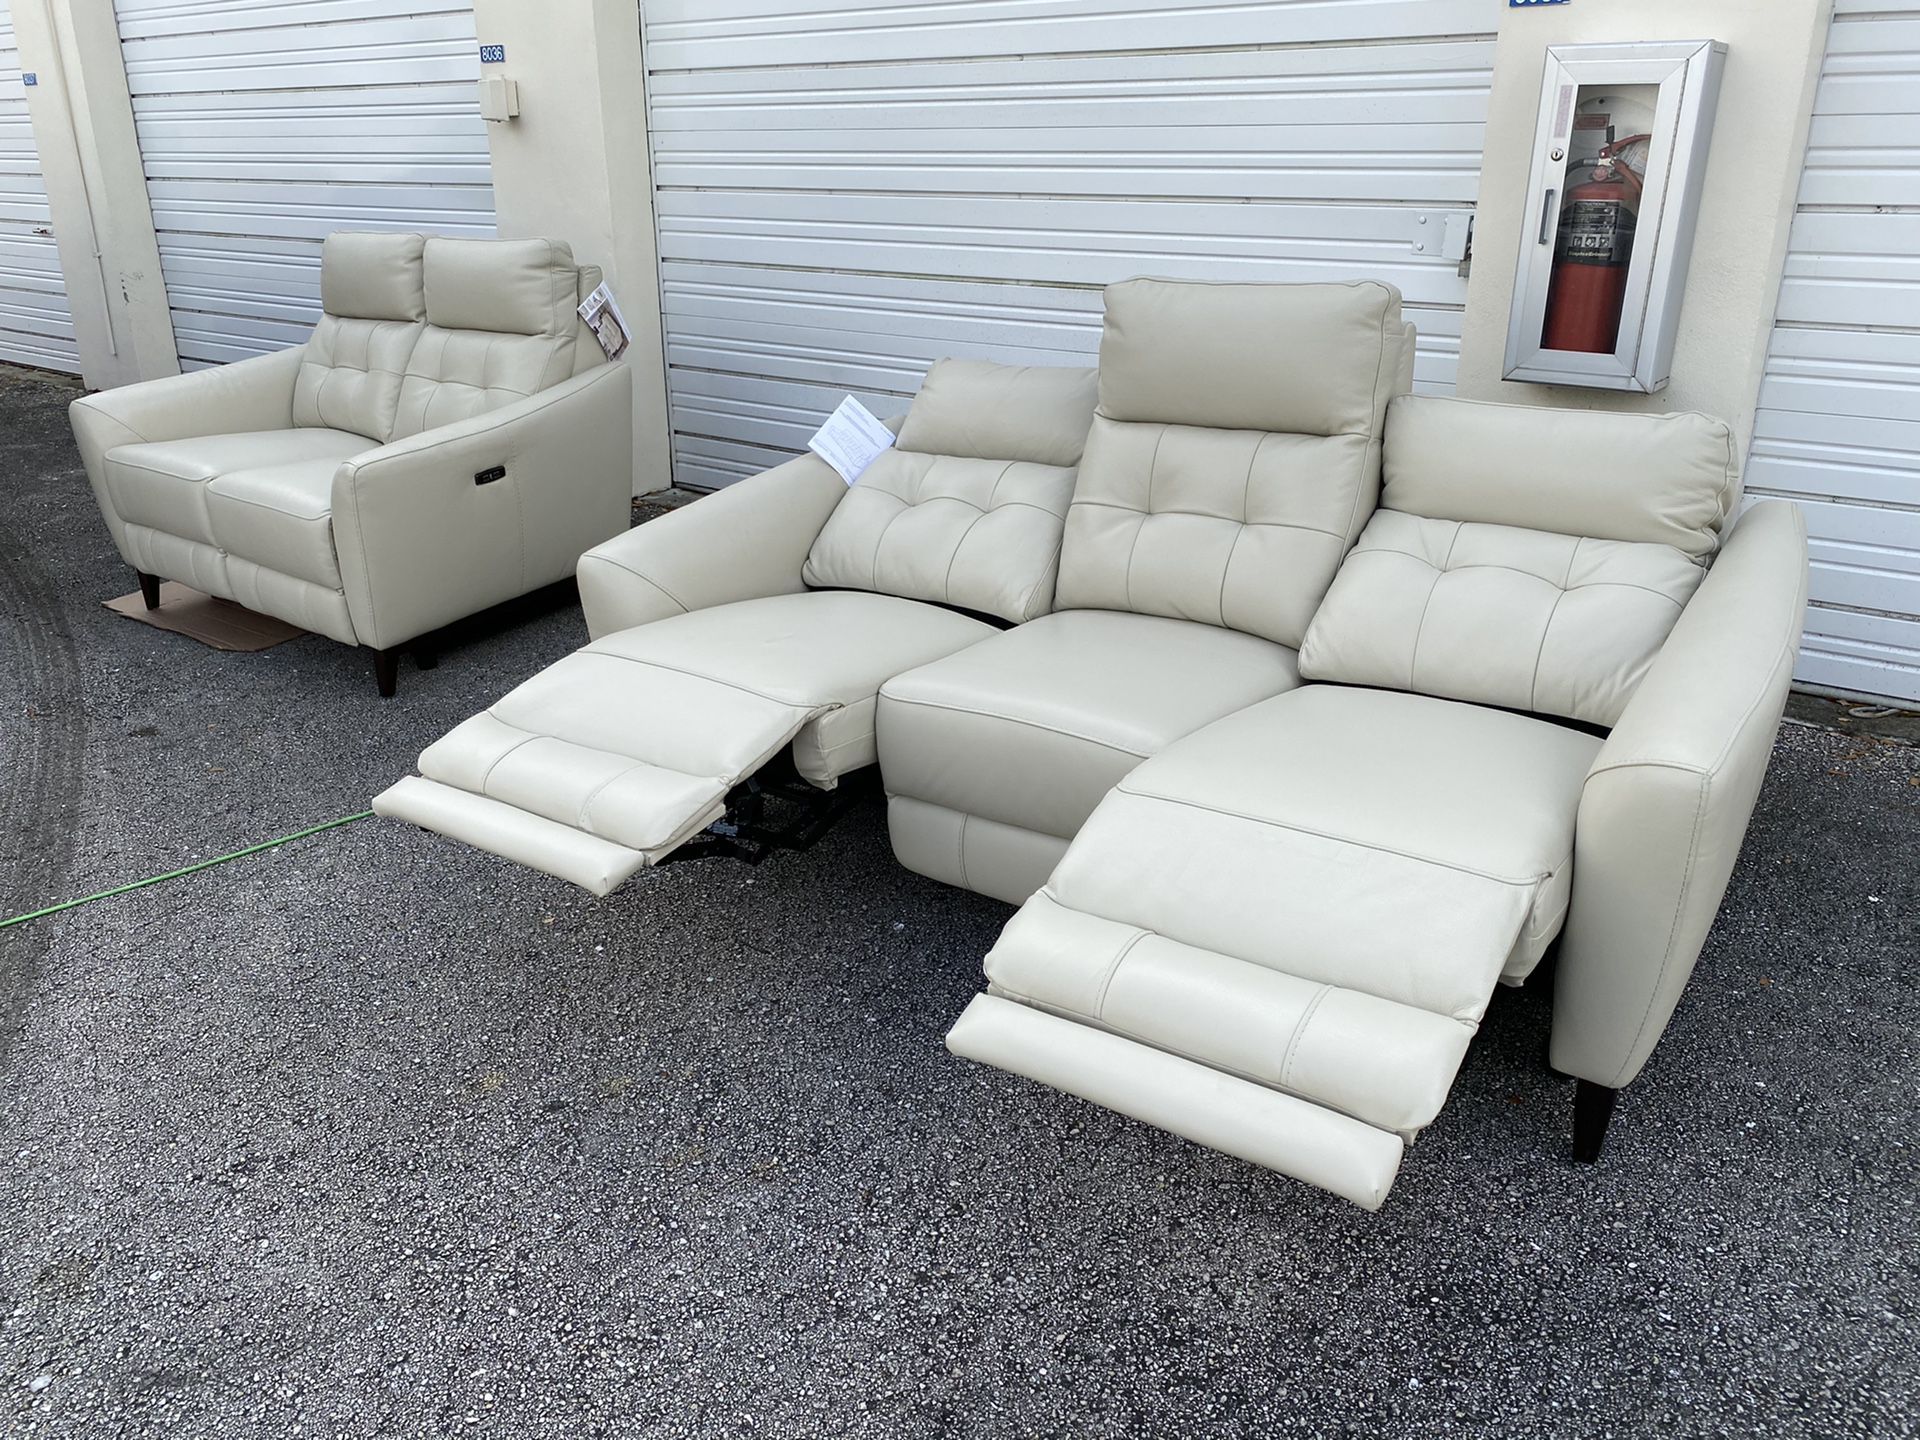 45% OFF // OPEN BOX LIKE NEW // COSTCO Timmons Leather Power Reclining Sofa and Loveseat